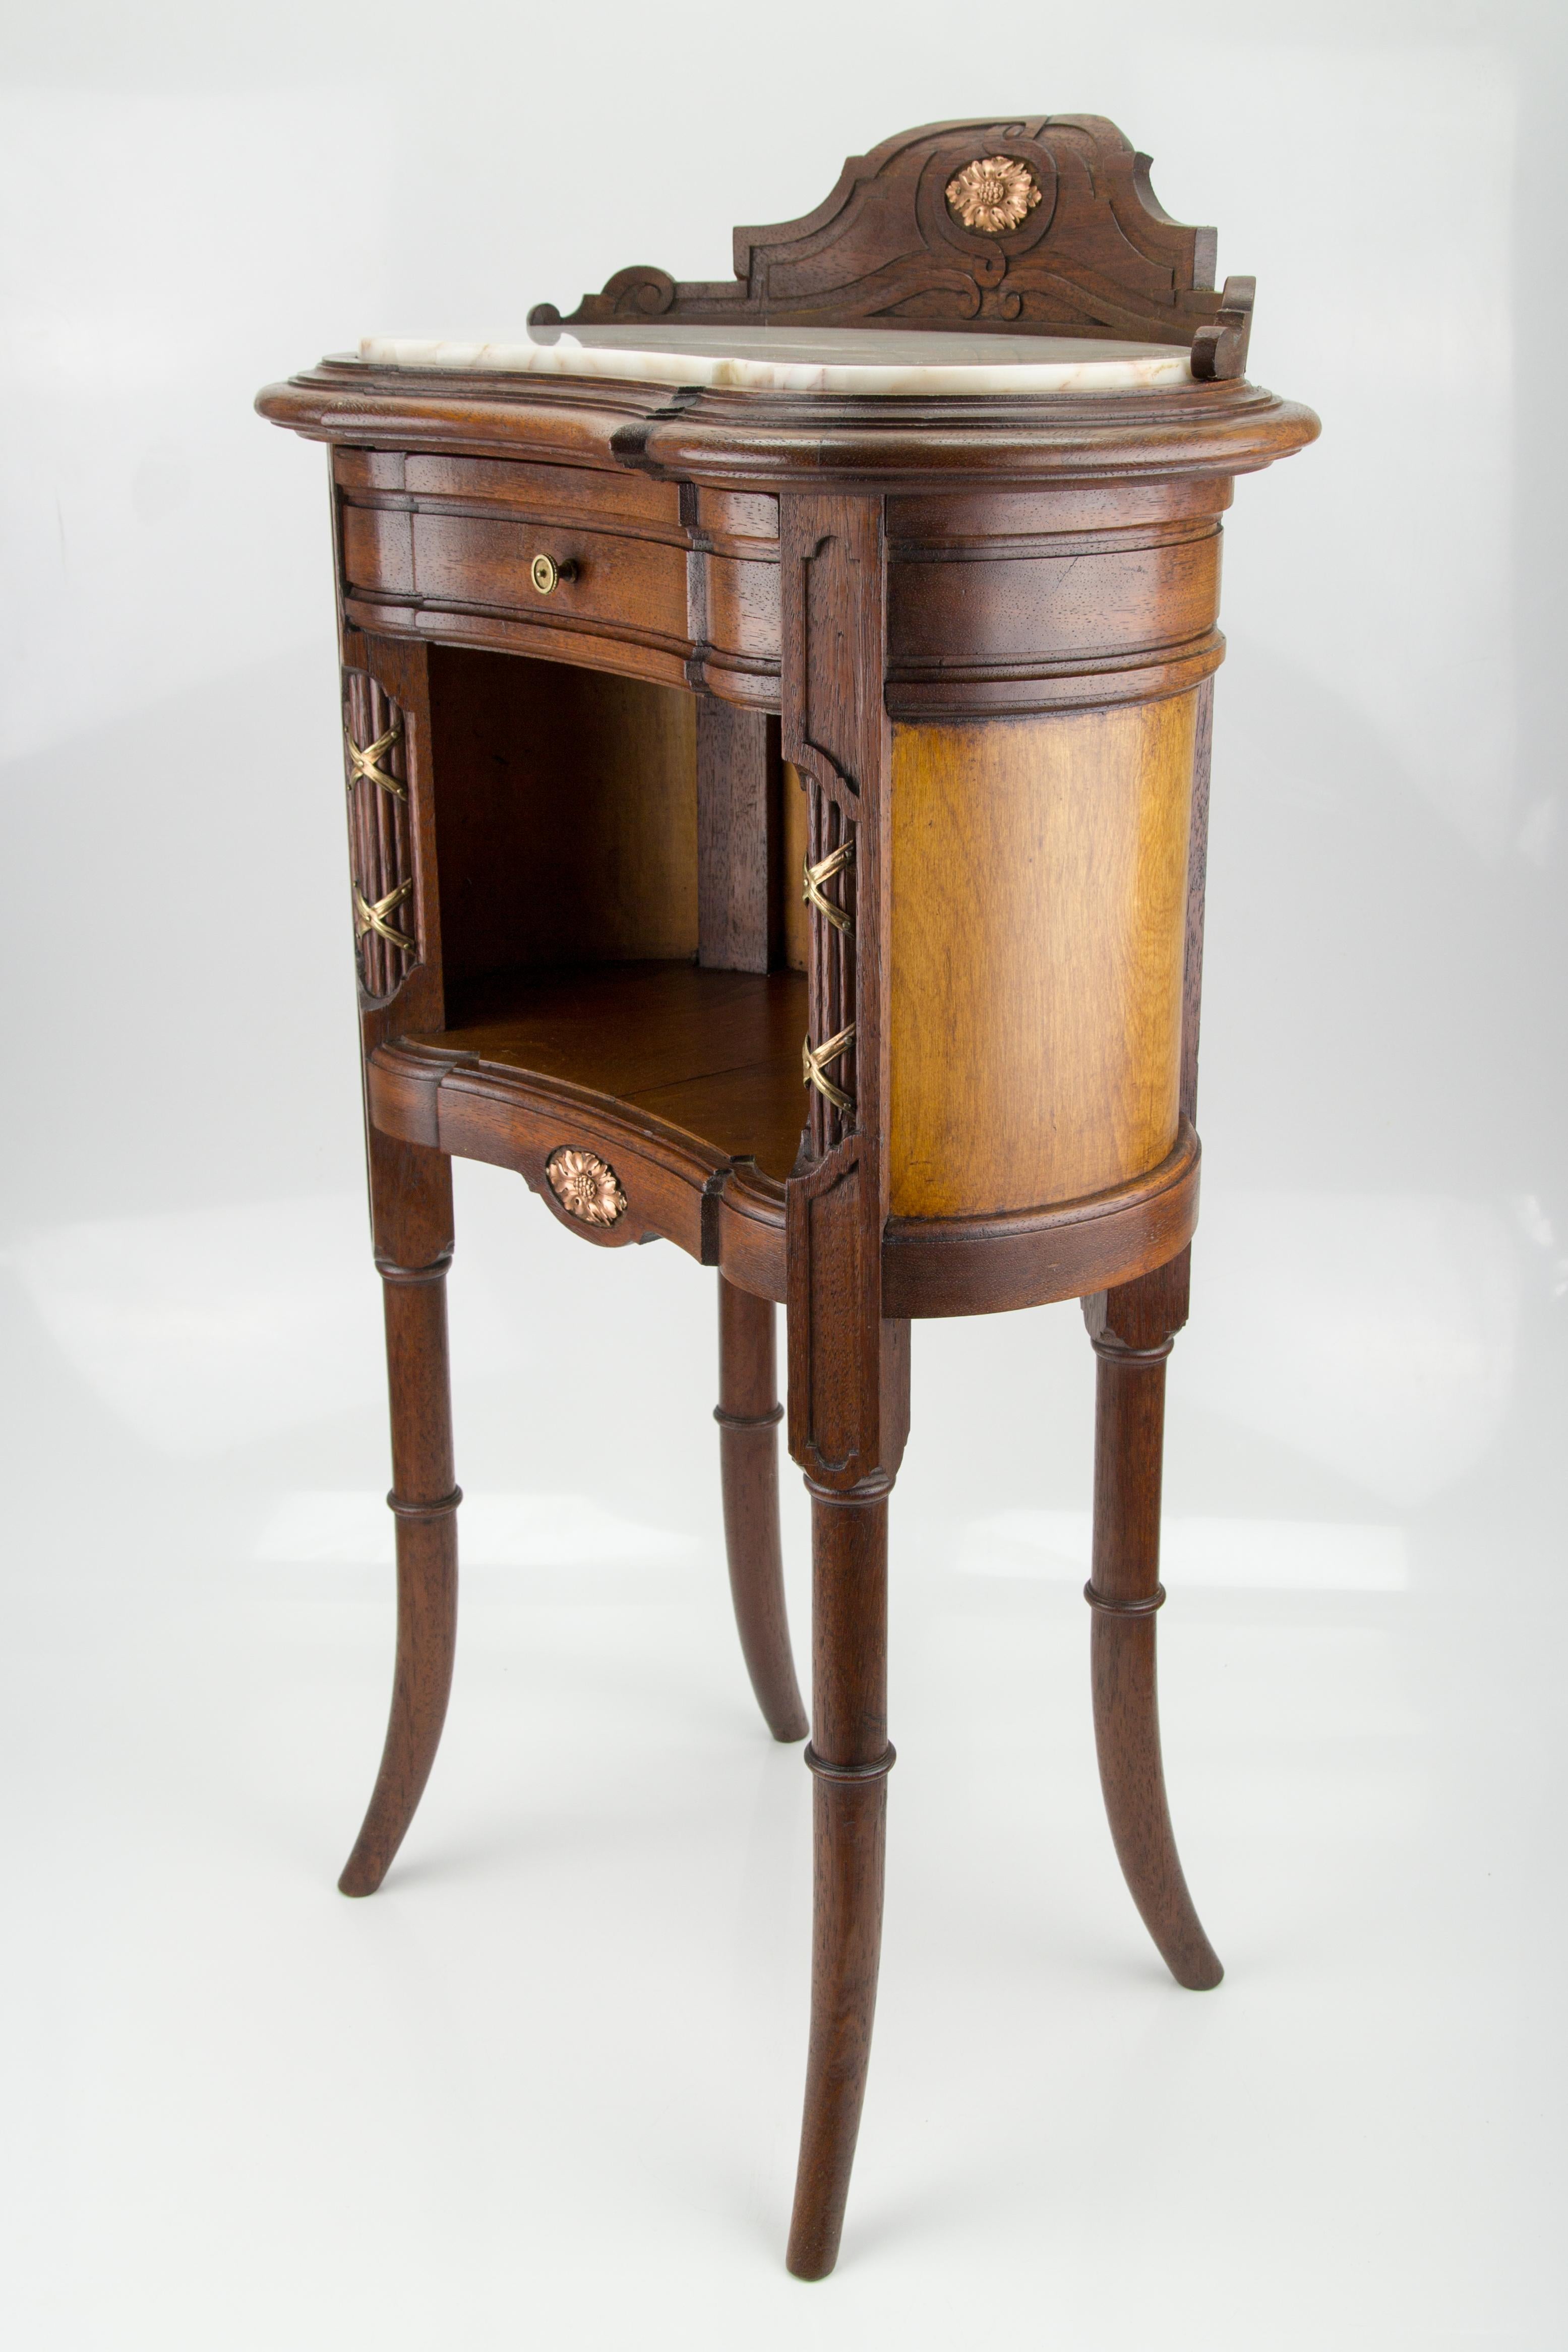 French Louis XVI-style kidney-shaped nightstand with marble top and brass mounts.
Adorable late 19th century Louis XVI style kidney-shaped nightstand or end table features a beige and ivory color marble top, one drawer, and beautiful brass mounts, a